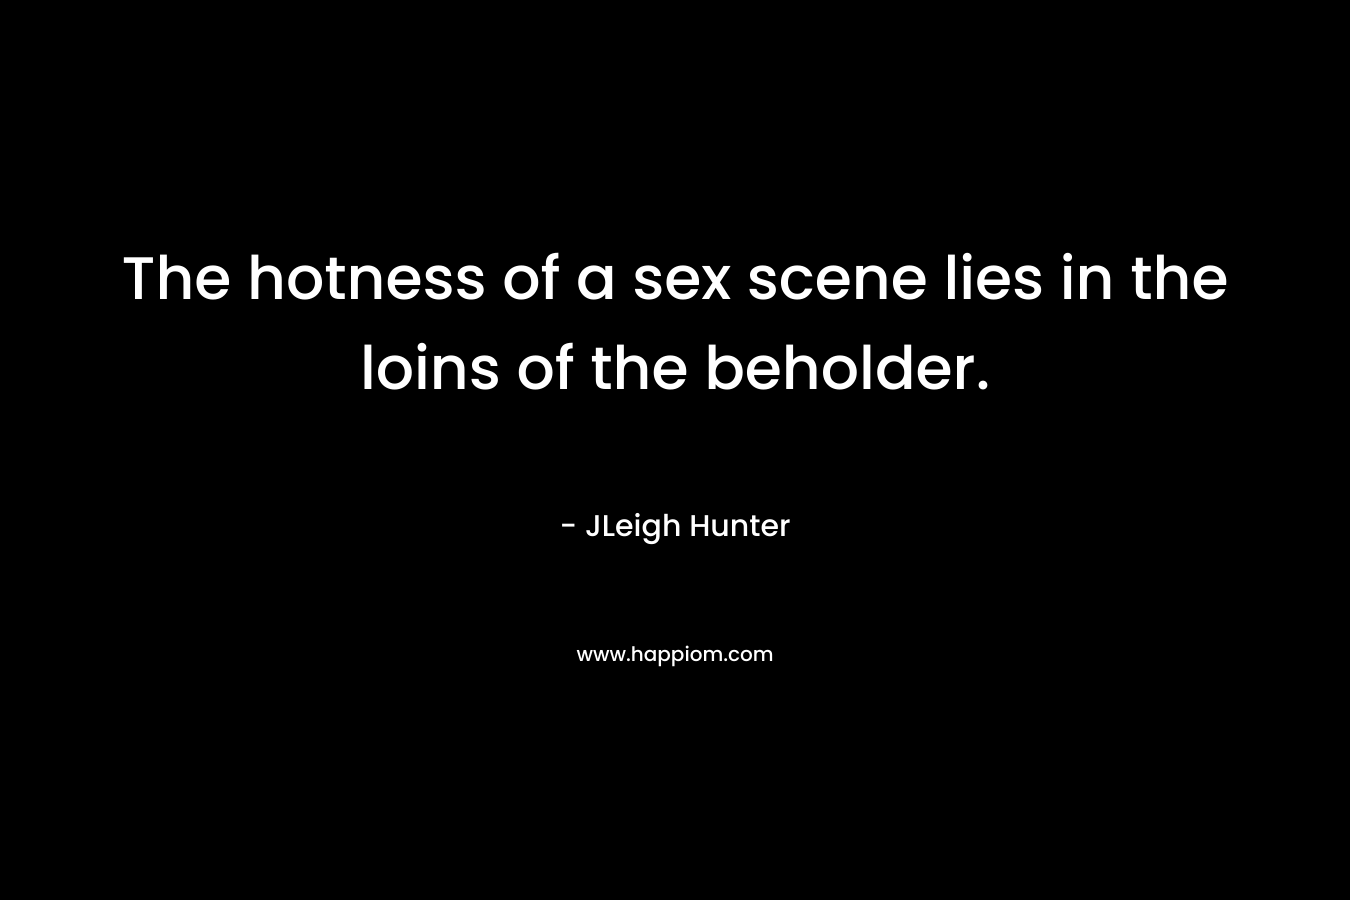 The hotness of a sex scene lies in the loins of the beholder. – JLeigh Hunter